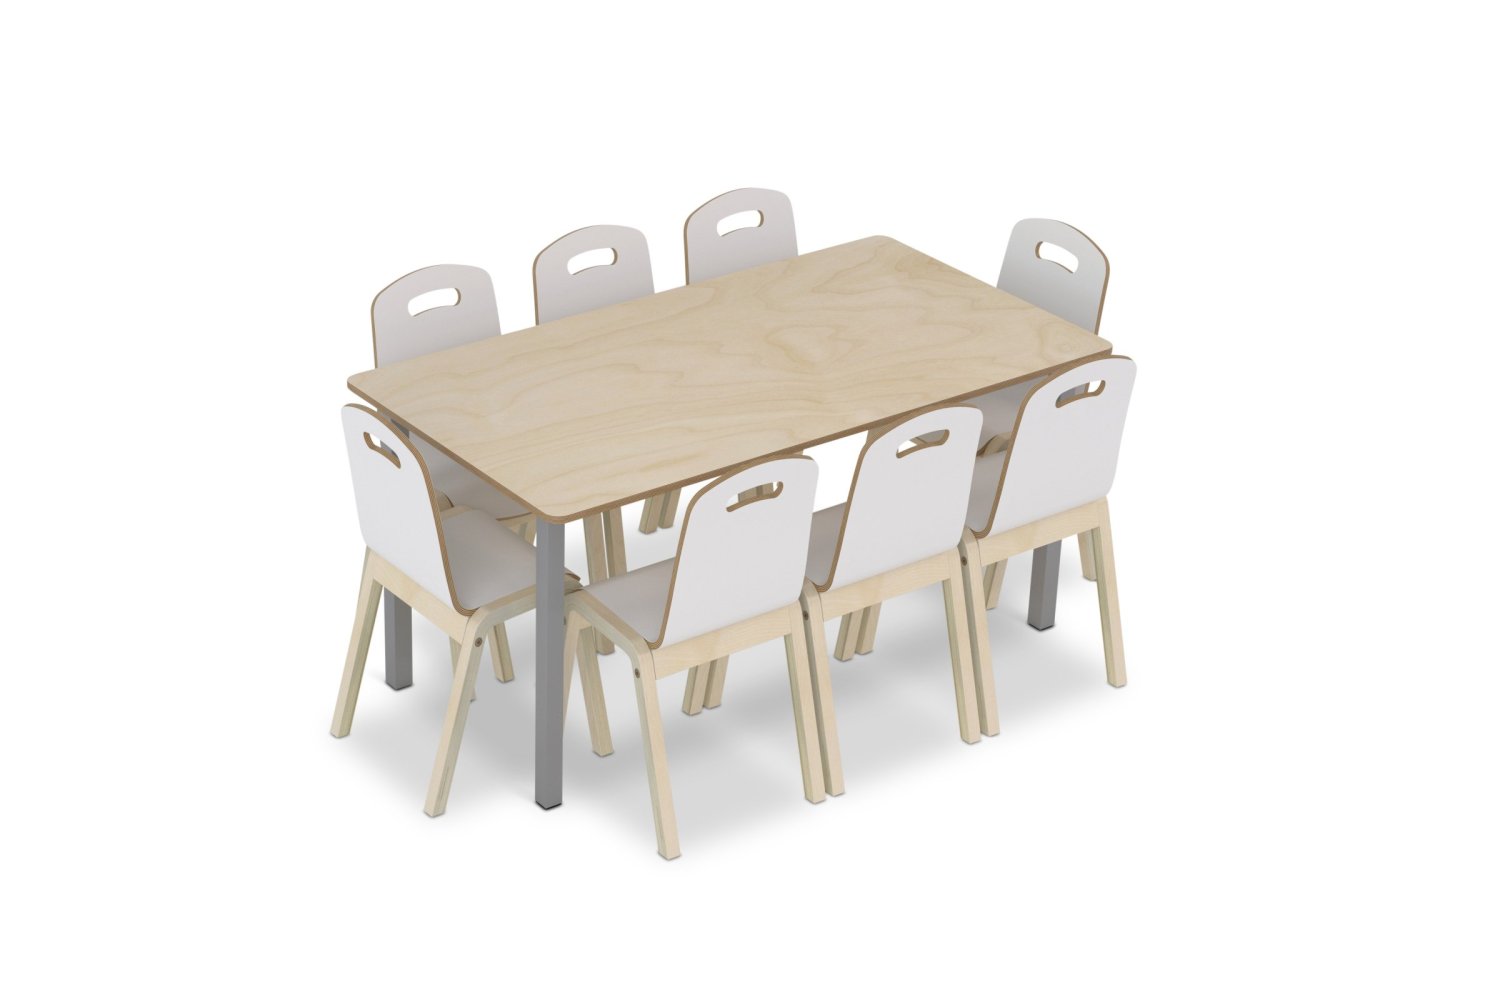 1500 x 800 Birch with Starship Chairs